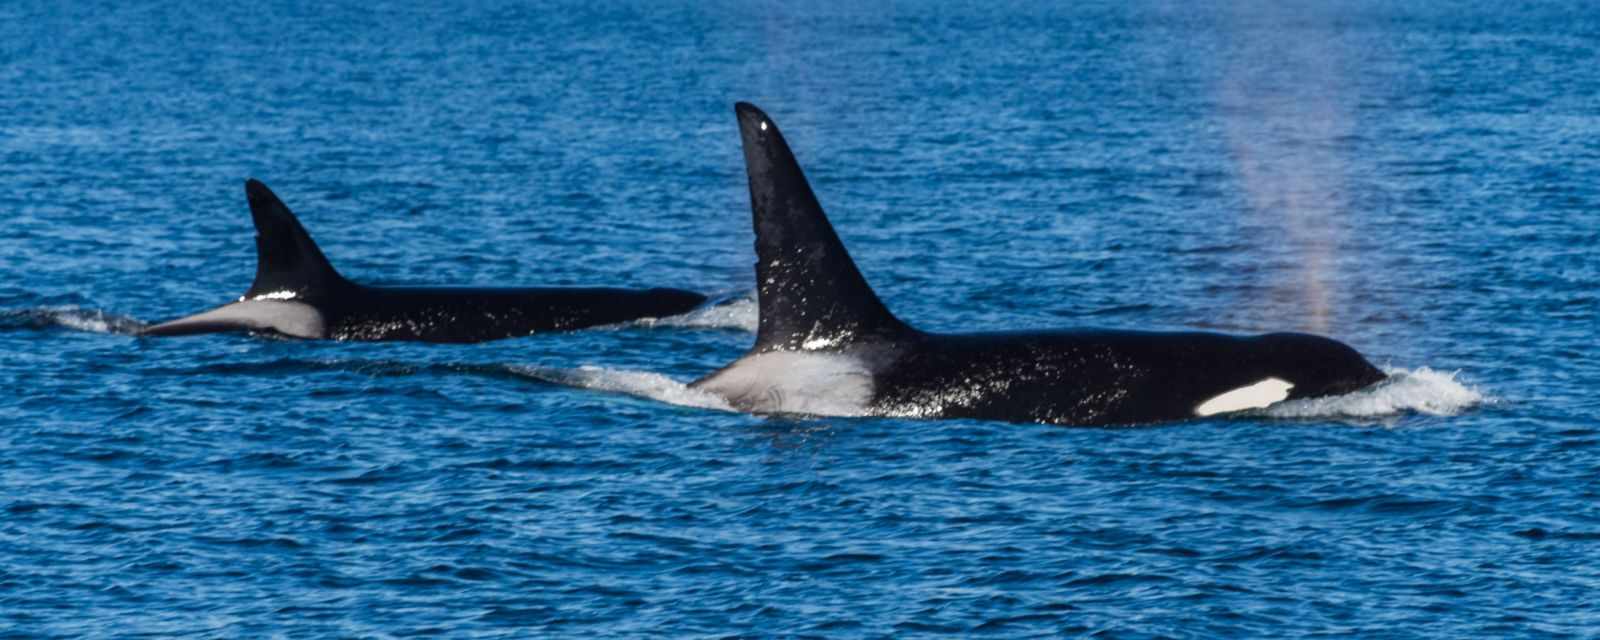 Vancouver Island Whale Watching - Whale and Orca Season Guide